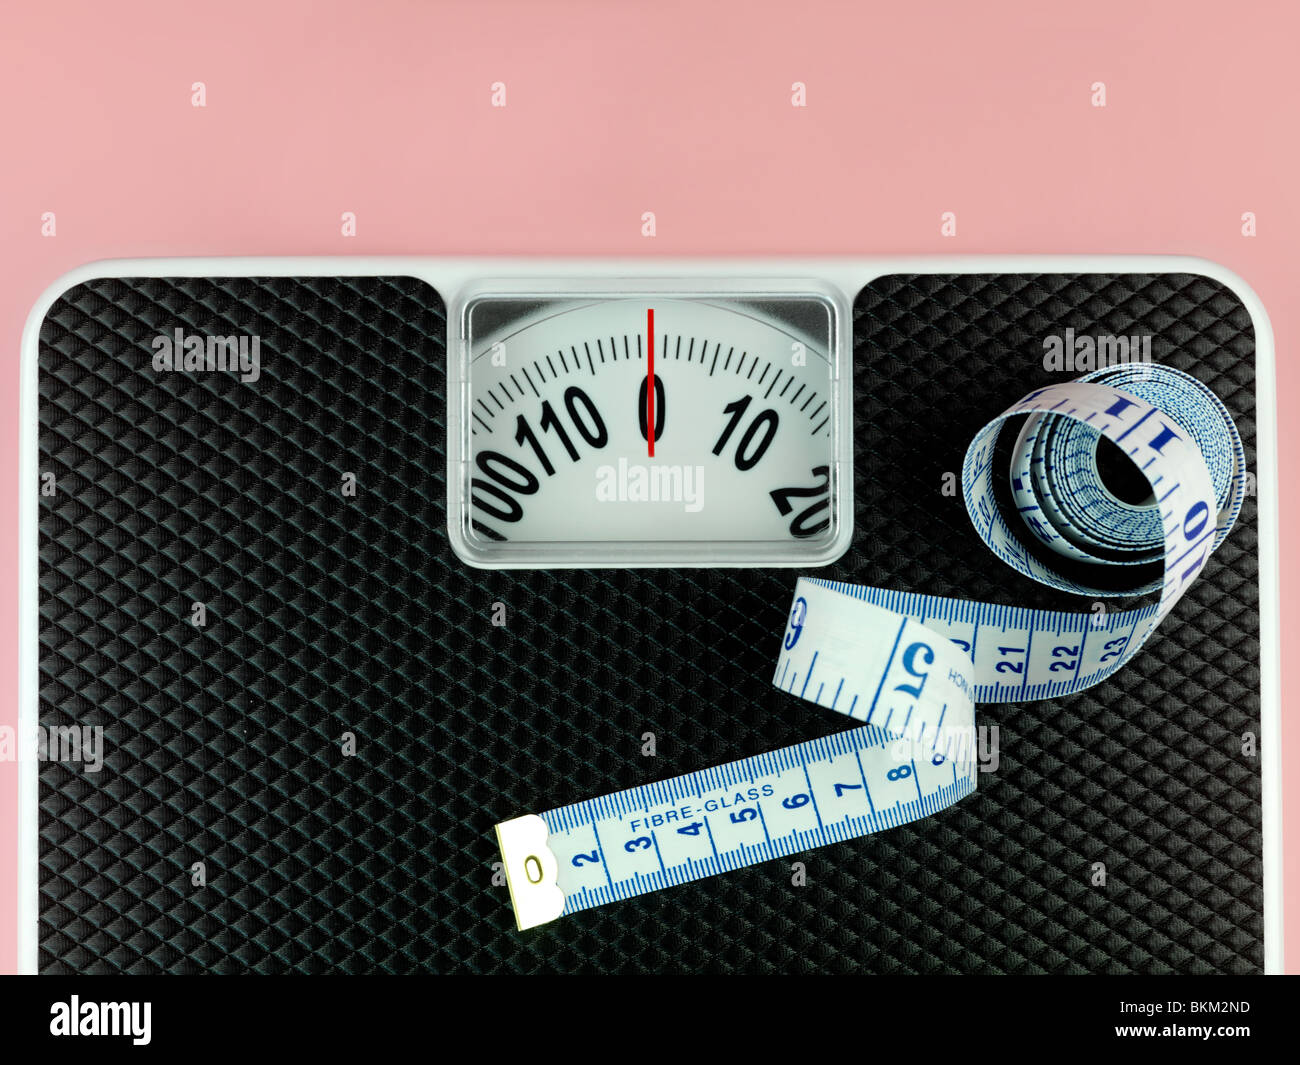 https://c8.alamy.com/comp/BKM2ND/a-set-of-bathroom-scales-isolated-against-a-pink-background-BKM2ND.jpg